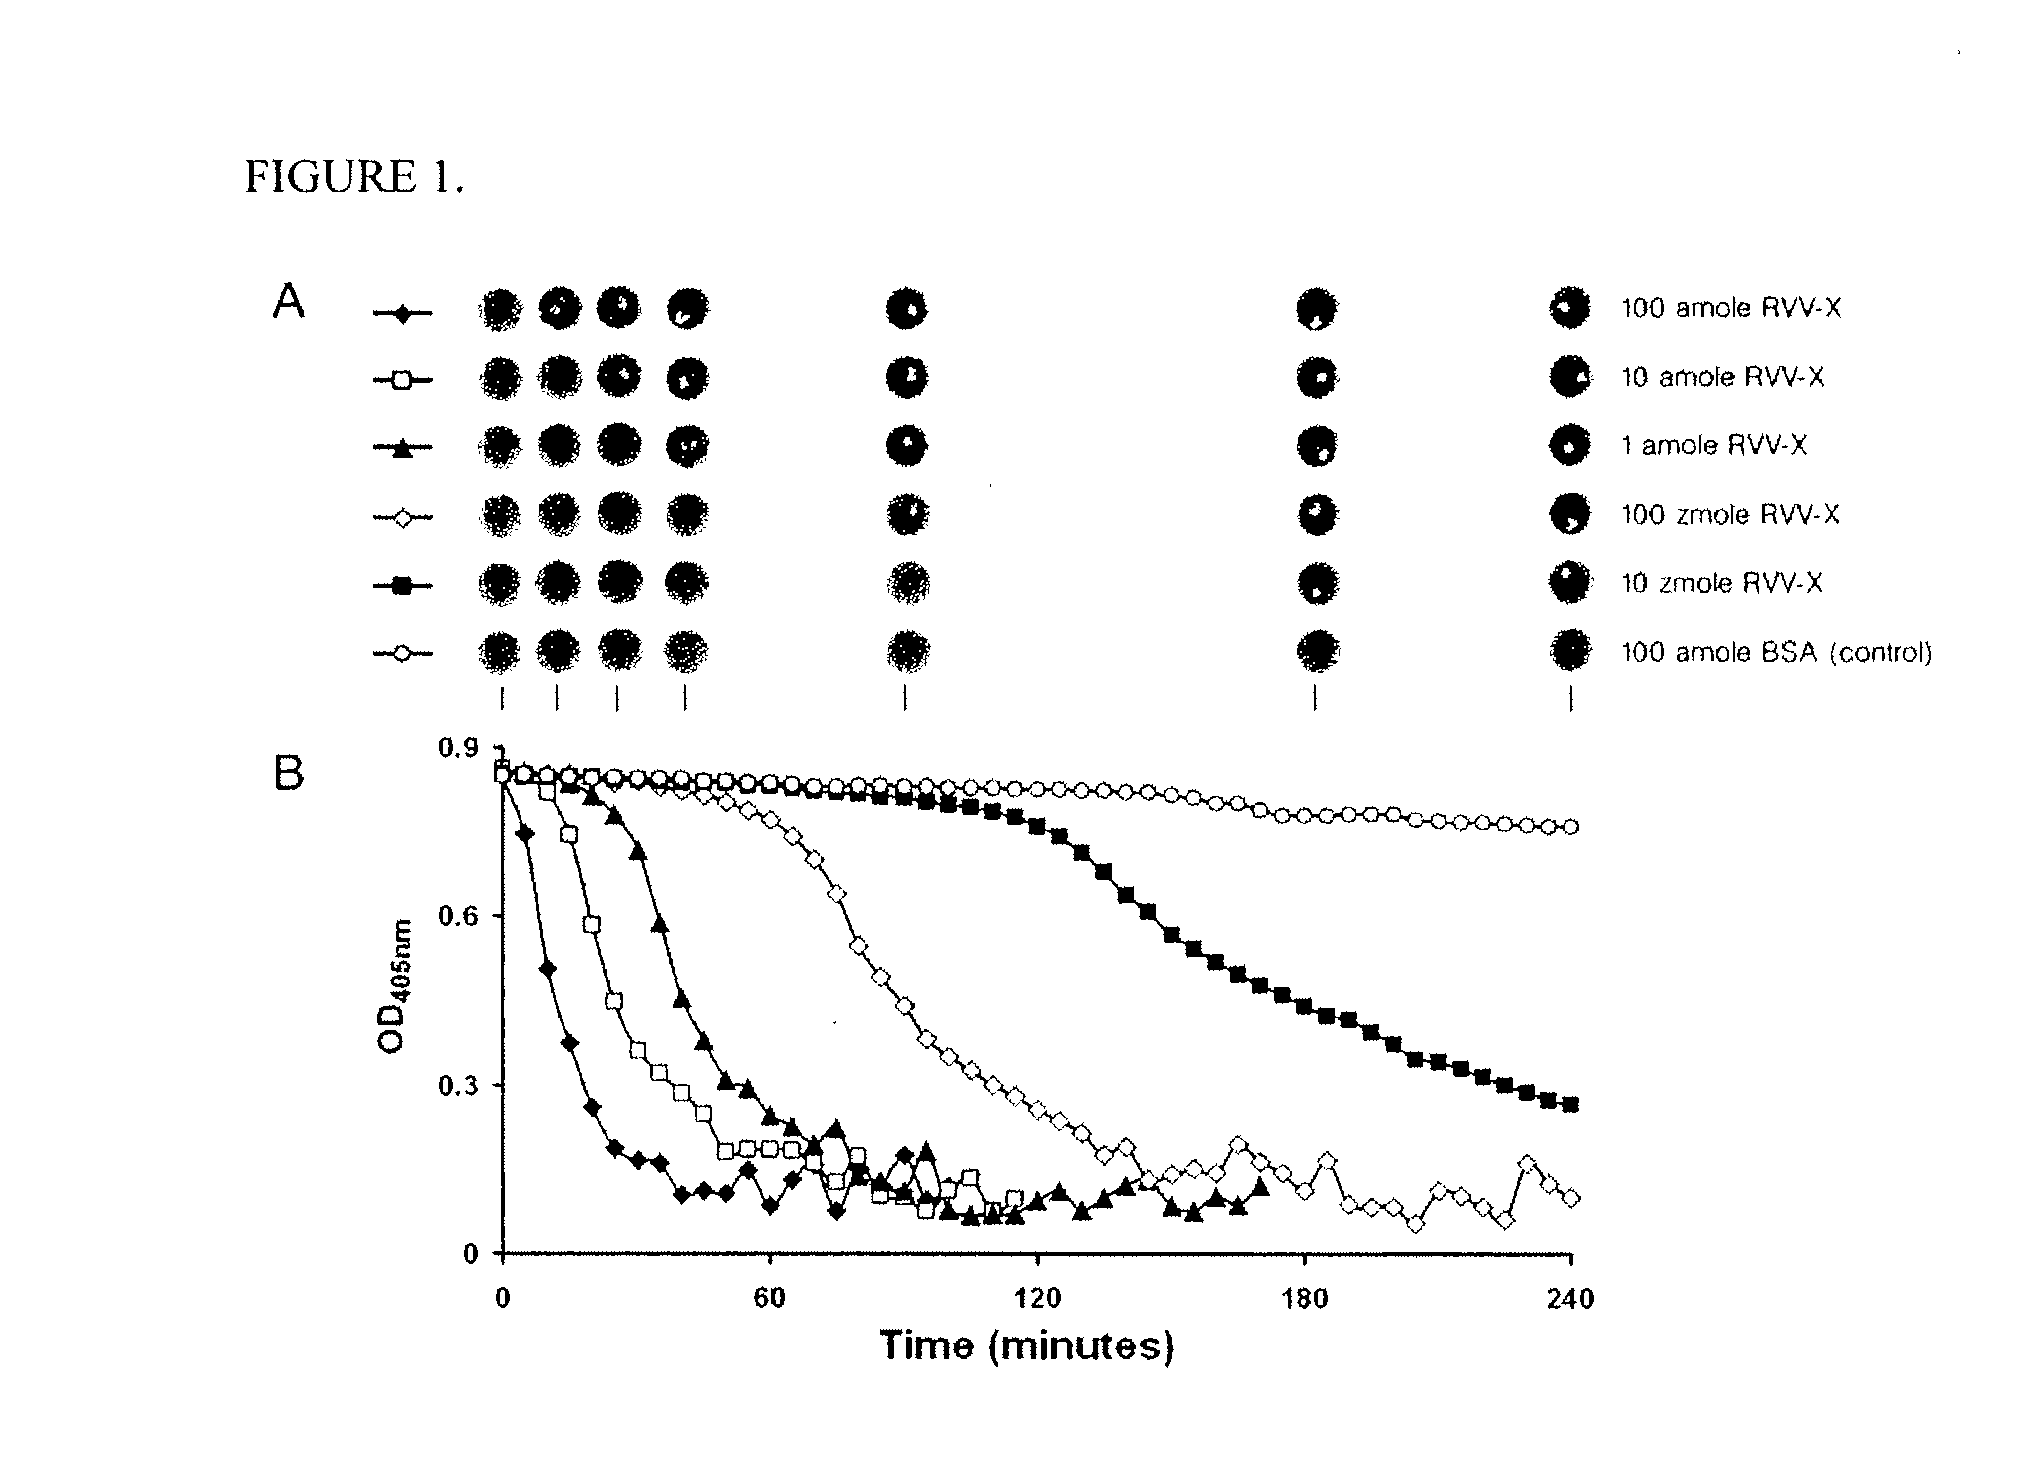 Universal fieldable assay with unassisted visual detection